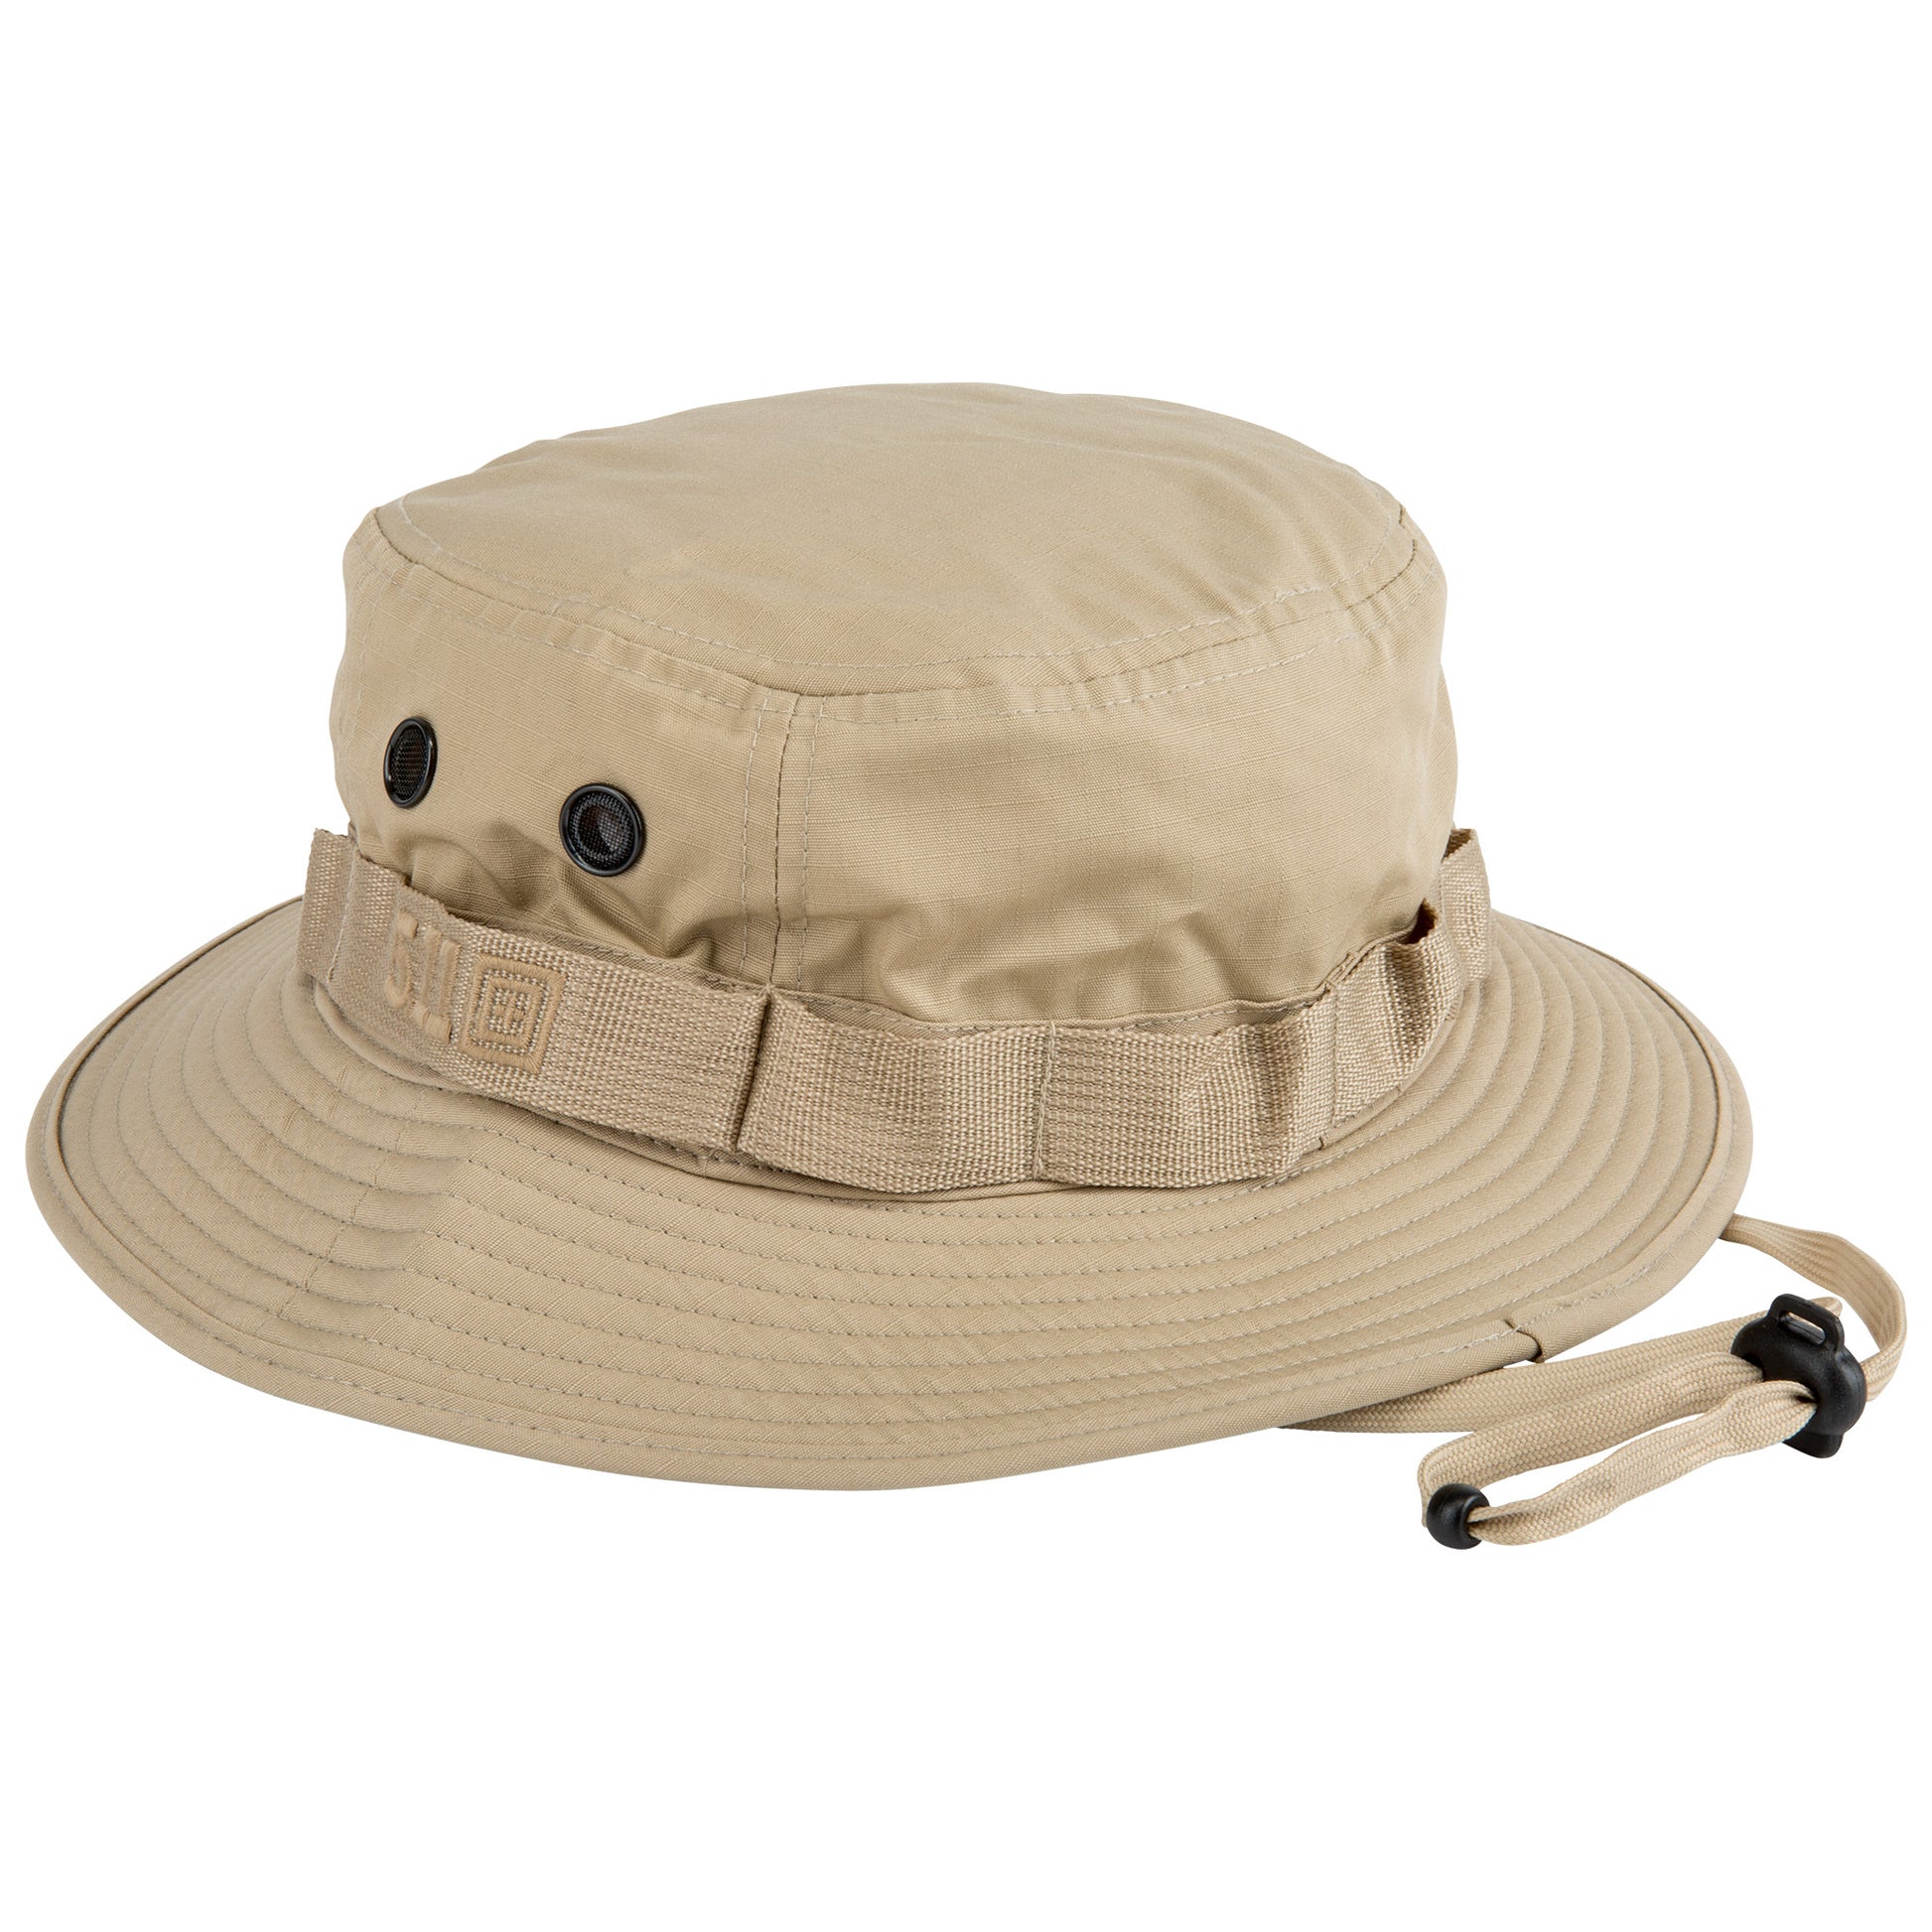 Rothco Adjustable Boonie Hat - Coyote Brown